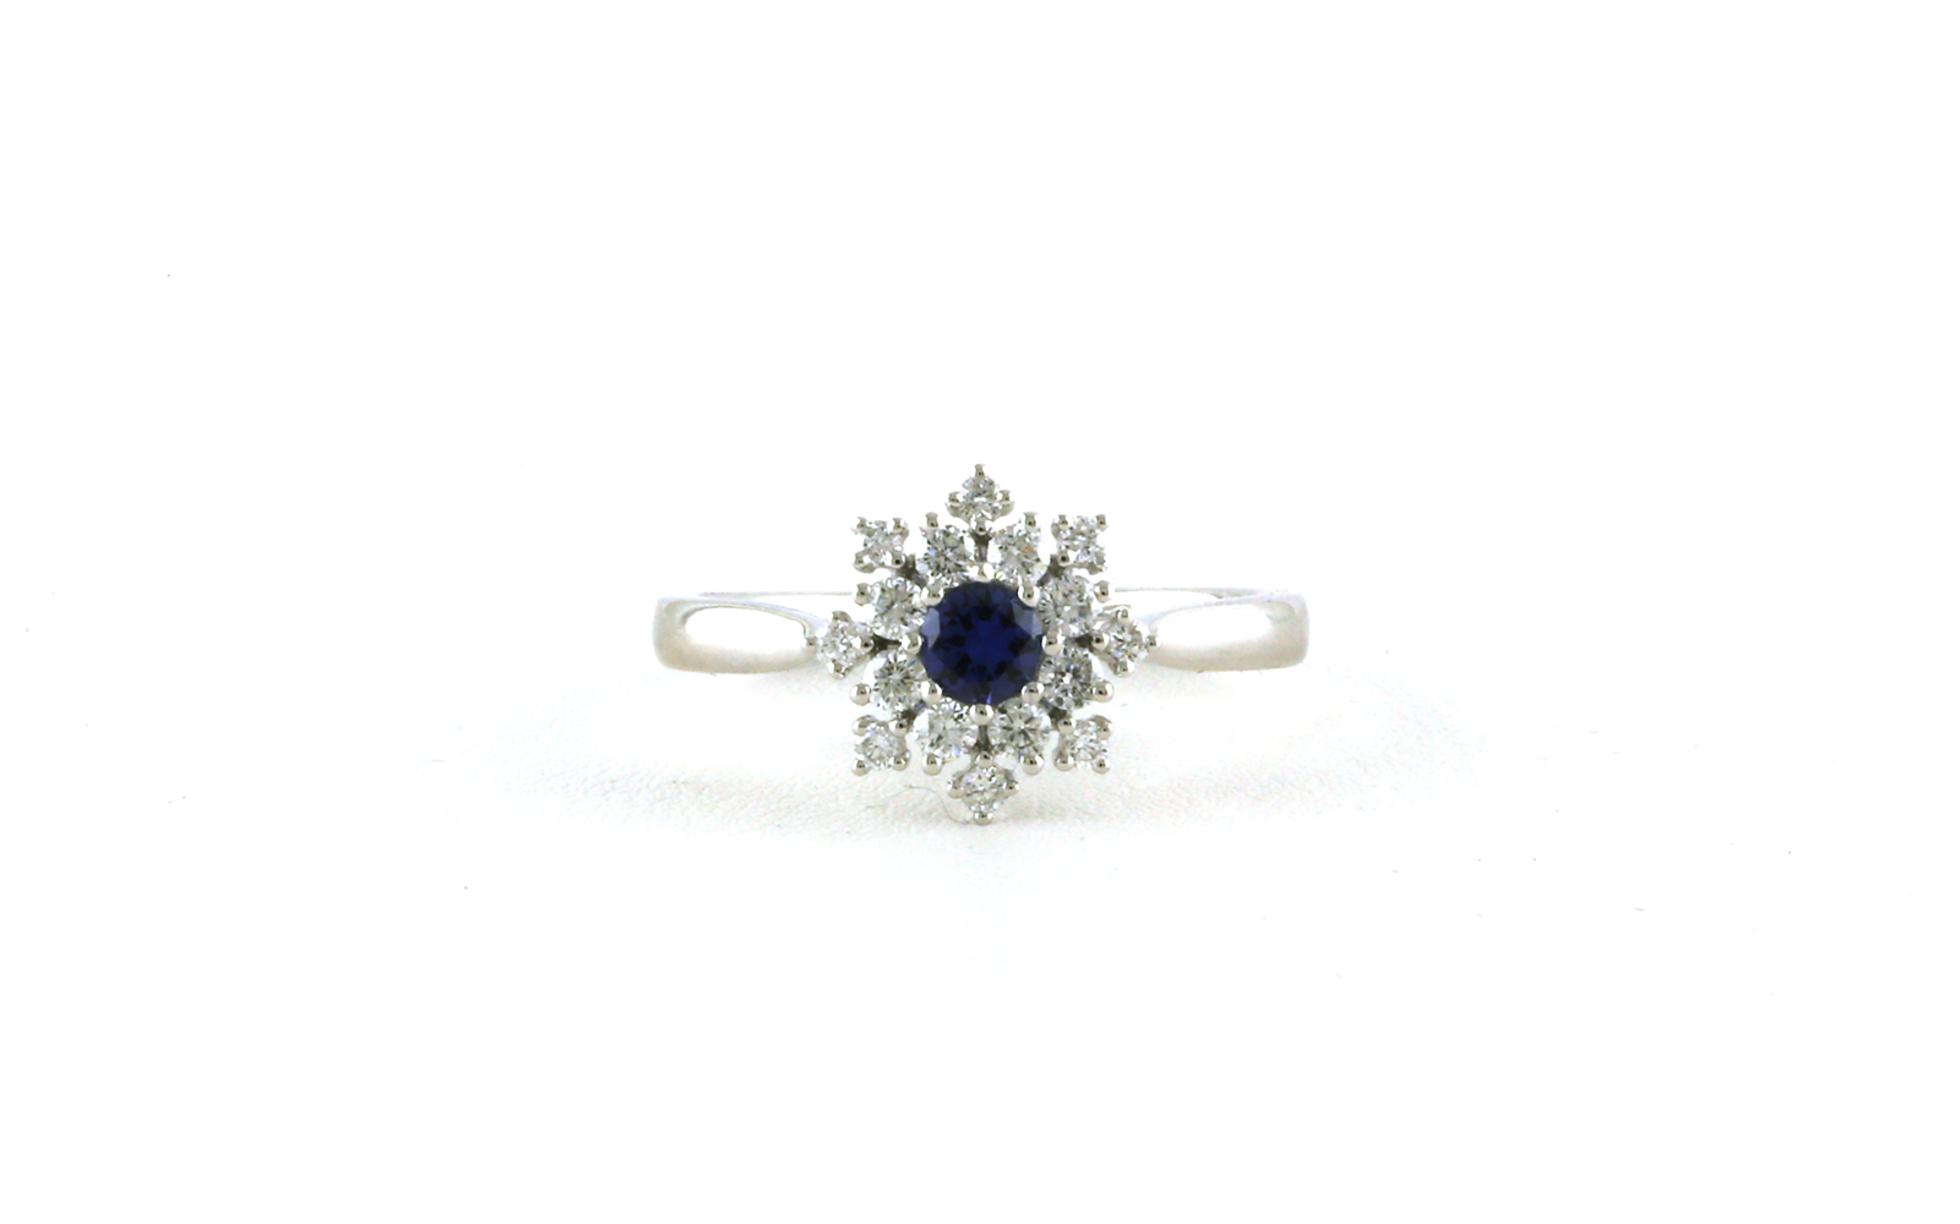 Snowflake Montana Yogo Sapphire Diamond Cluster Ring in White Gold (0.56cts)